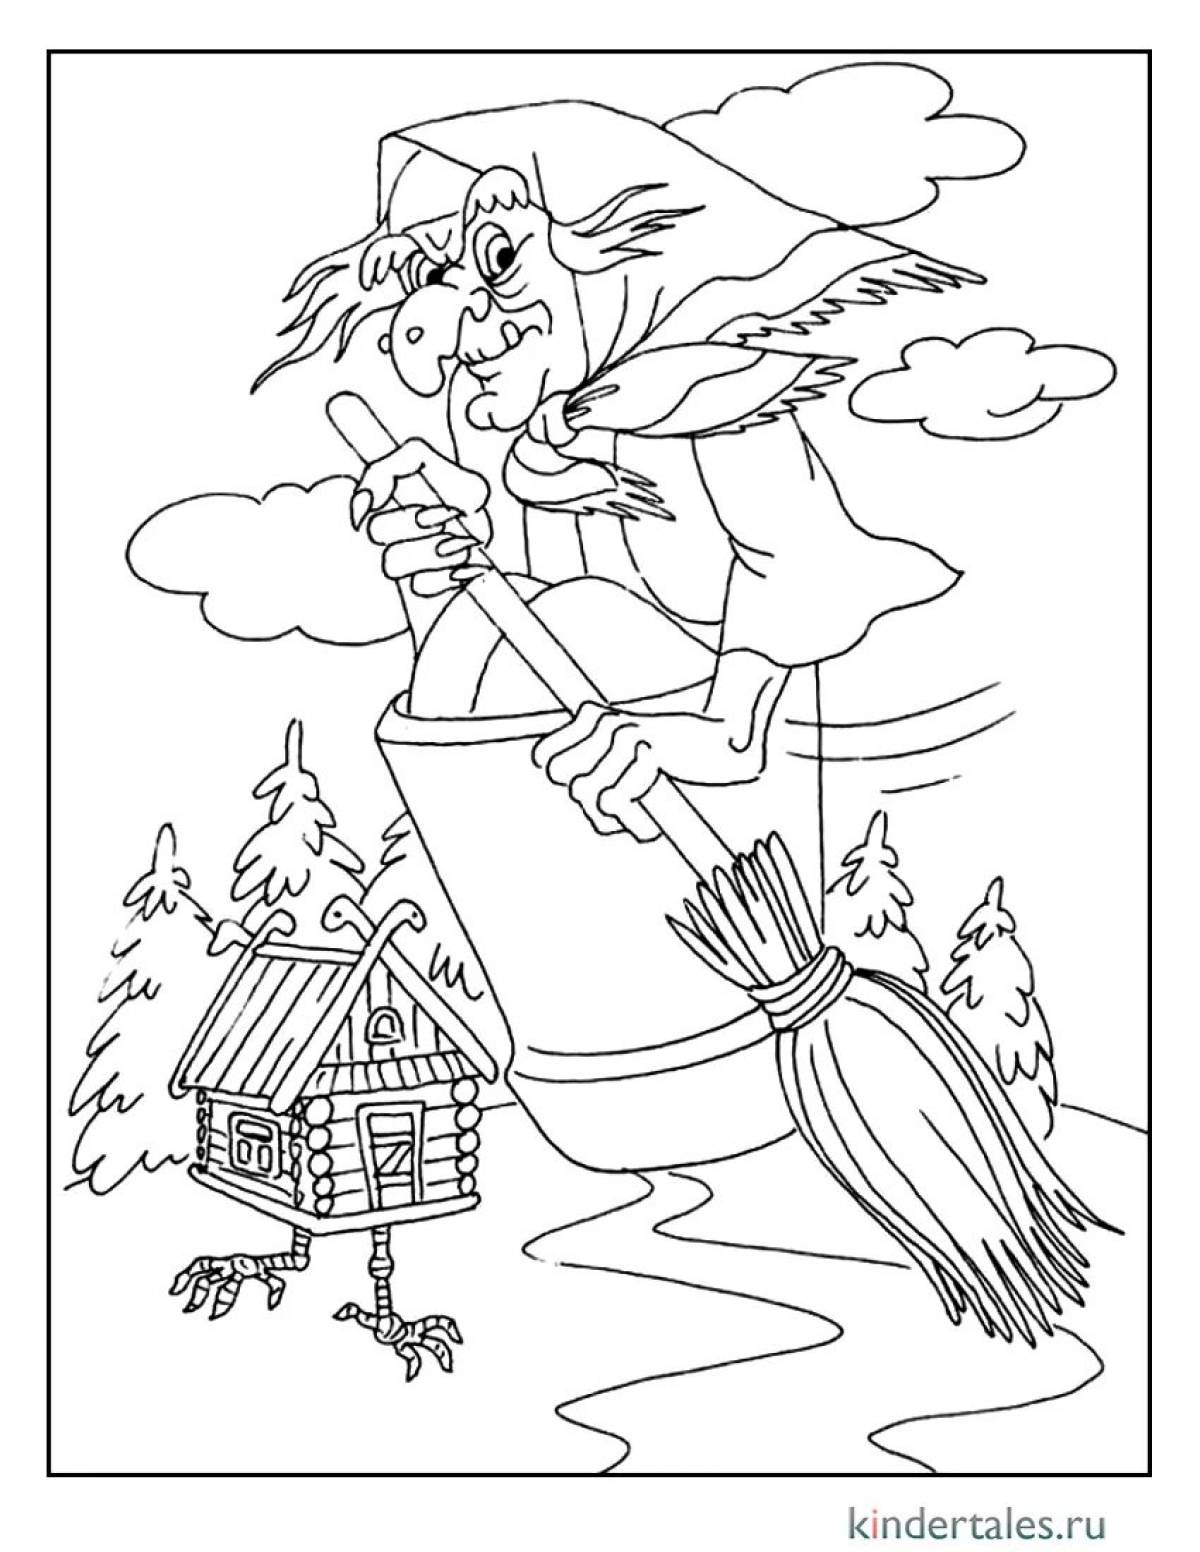 Inspirational baba yaga coloring book for 4-5 year olds